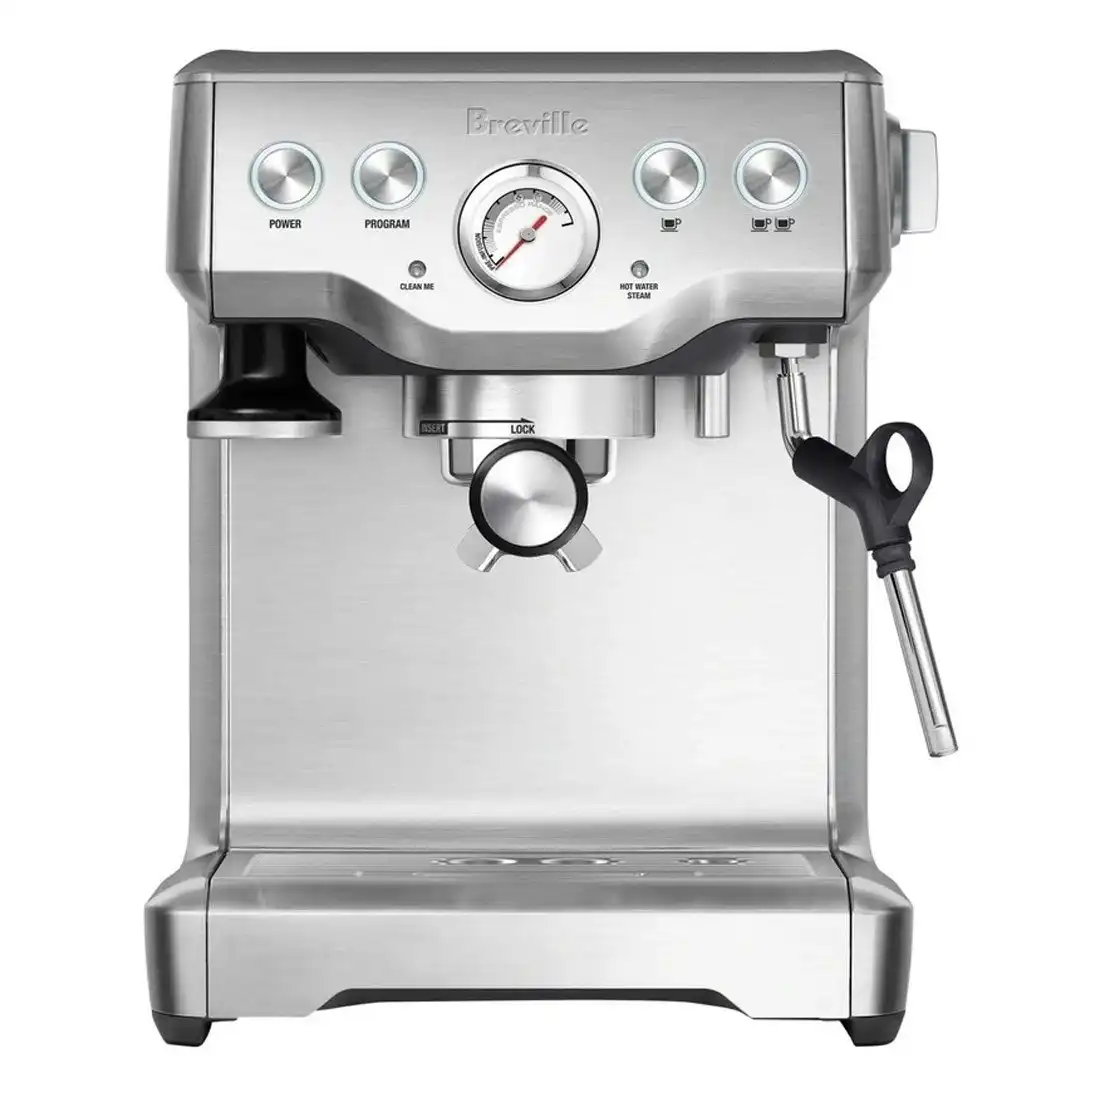 Breville The infuser Coffee Machine Brushed Stainless Steel BES840 - Silver